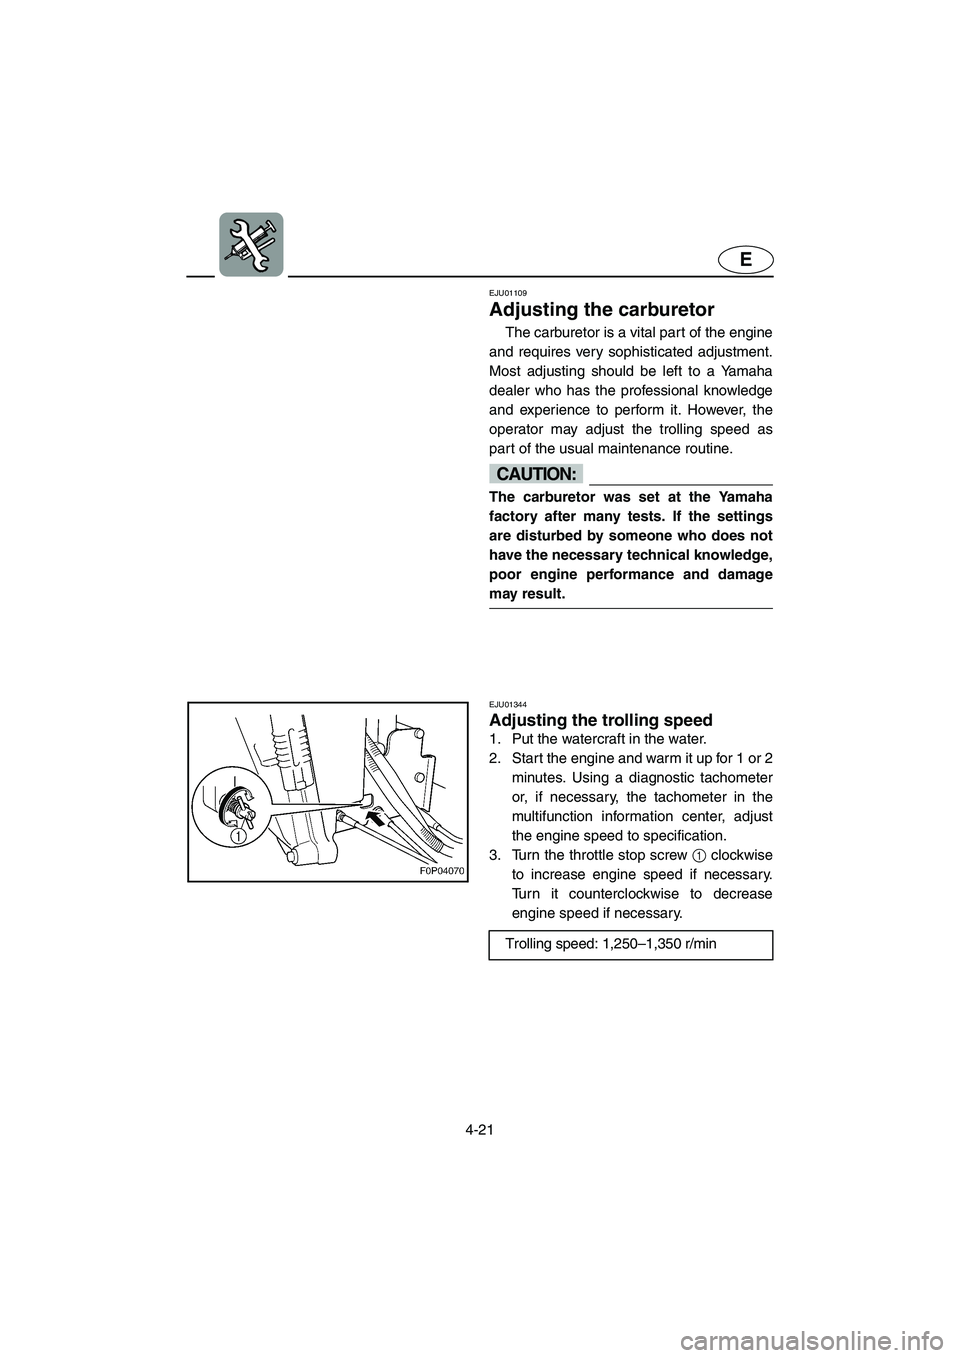 YAMAHA GP800R 2002  Owners Manual 4-21
E
EJU01109 
Adjusting the carburetor  
The carburetor is a vital part of the engine
and requires very sophisticated adjustment.
Most adjusting should be left to a Yamaha
dealer who has the profes